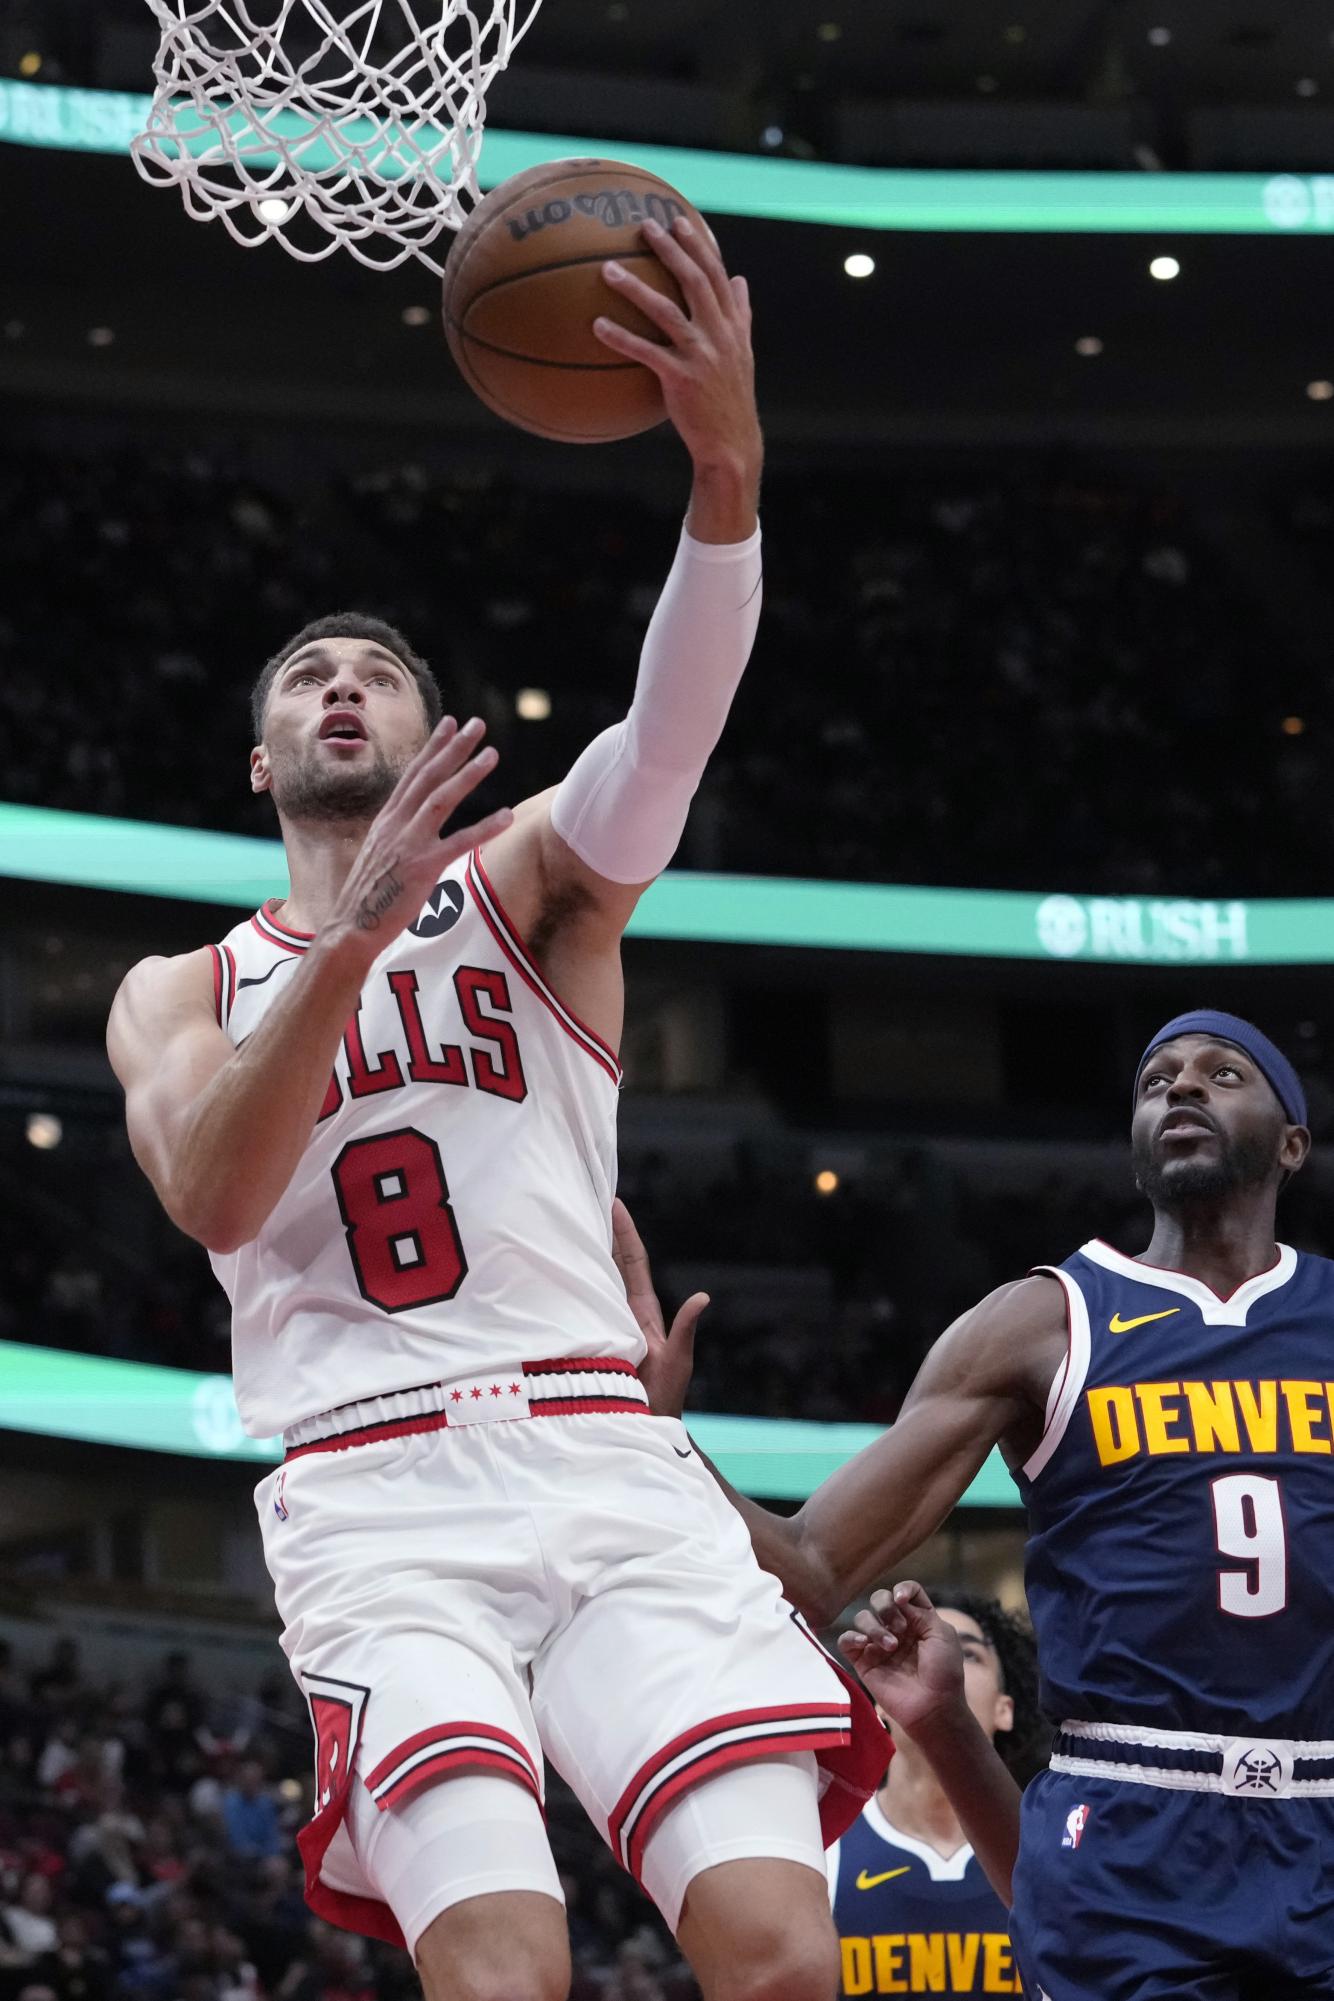 Zach LaVine sets Chicago Bulls franchise record for most three